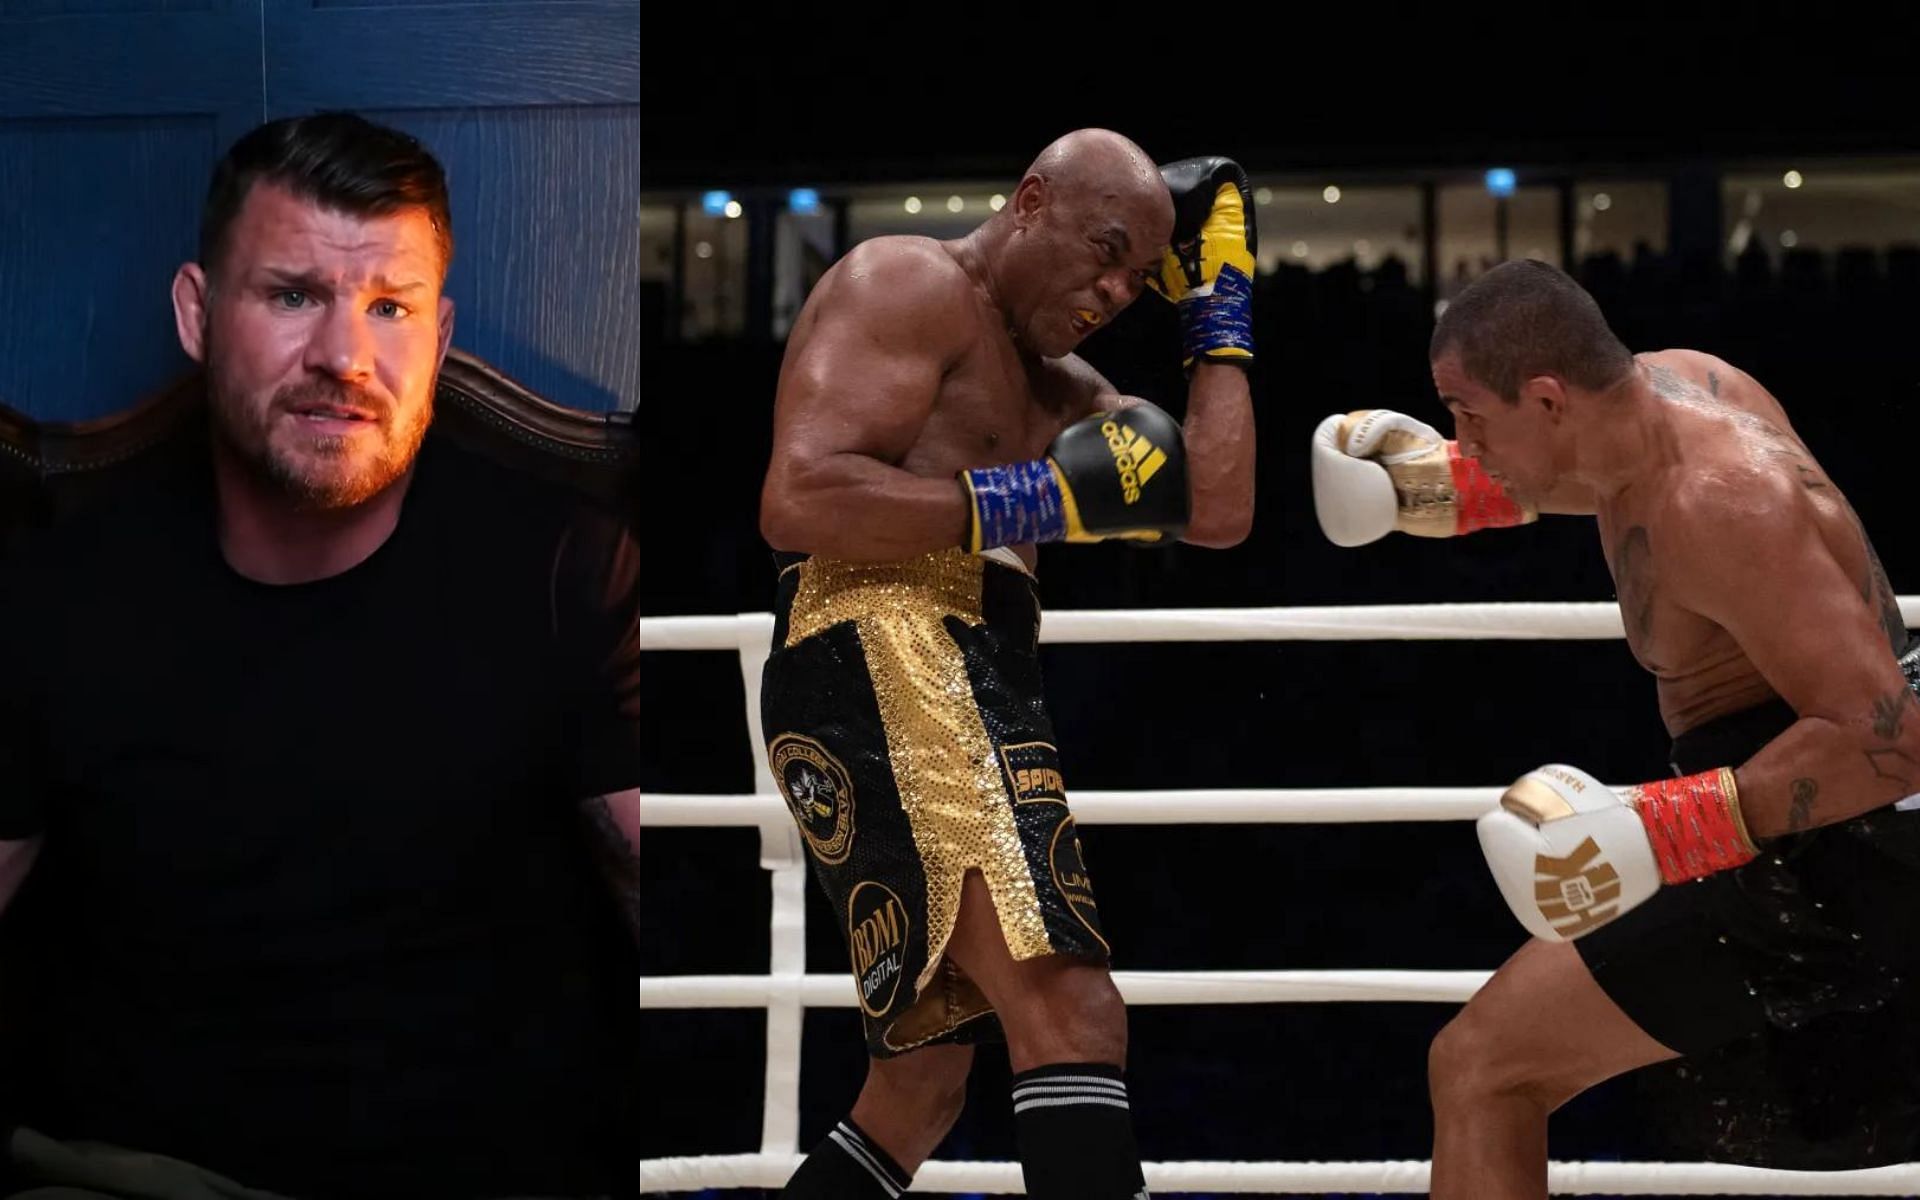 Michael Bisping (L) via YouTube/ Michael Bisping; Anderson Silva (C) competes with Bruno Machado (R) during the Abu Dhabi Unity Boxing event